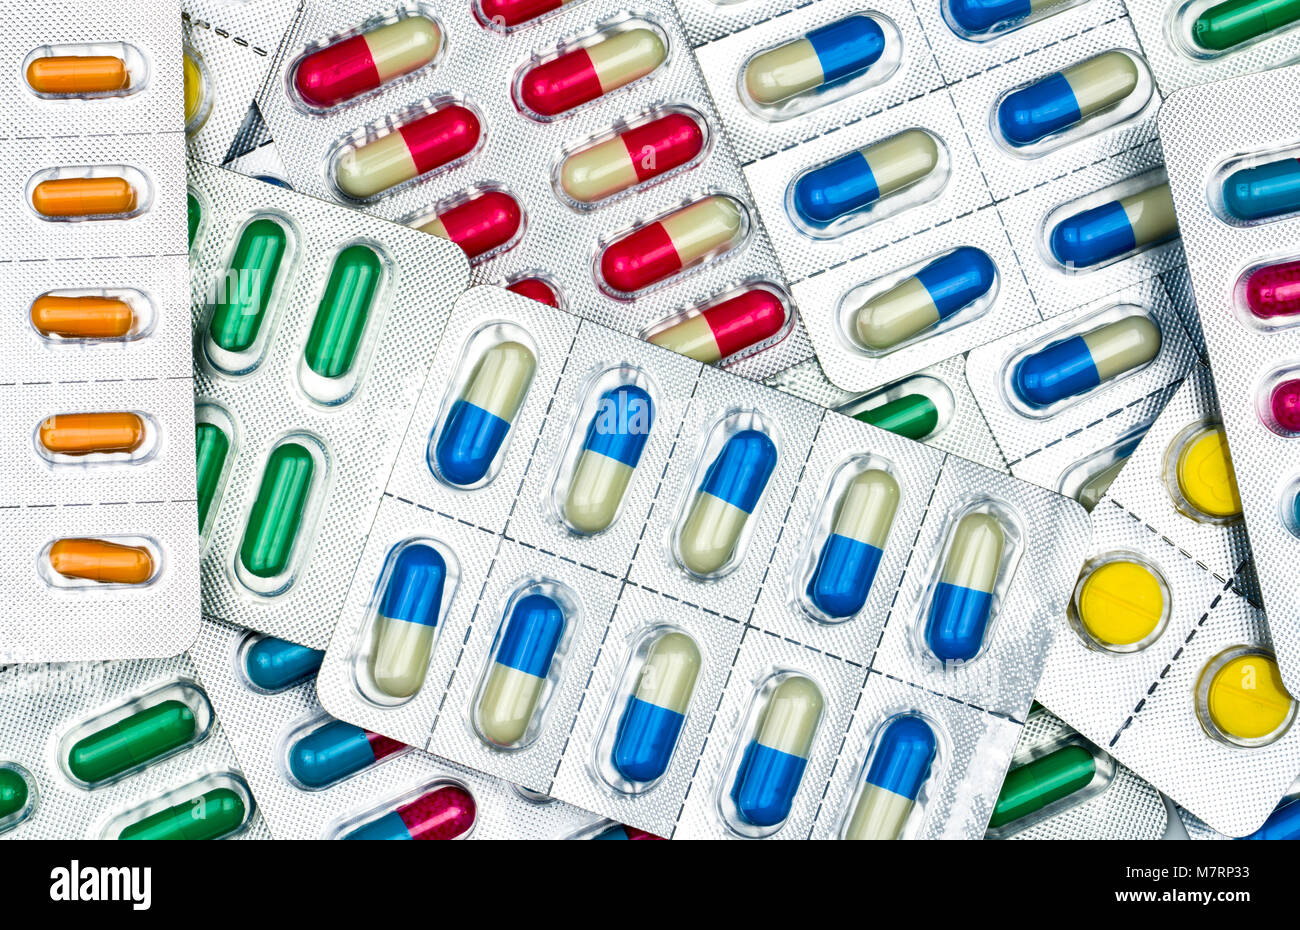 Top view of colorful tablets and capsules pills in blister packs. Global health care and drug use with reasonable concept. Antibiotics resistance conc Stock Photo